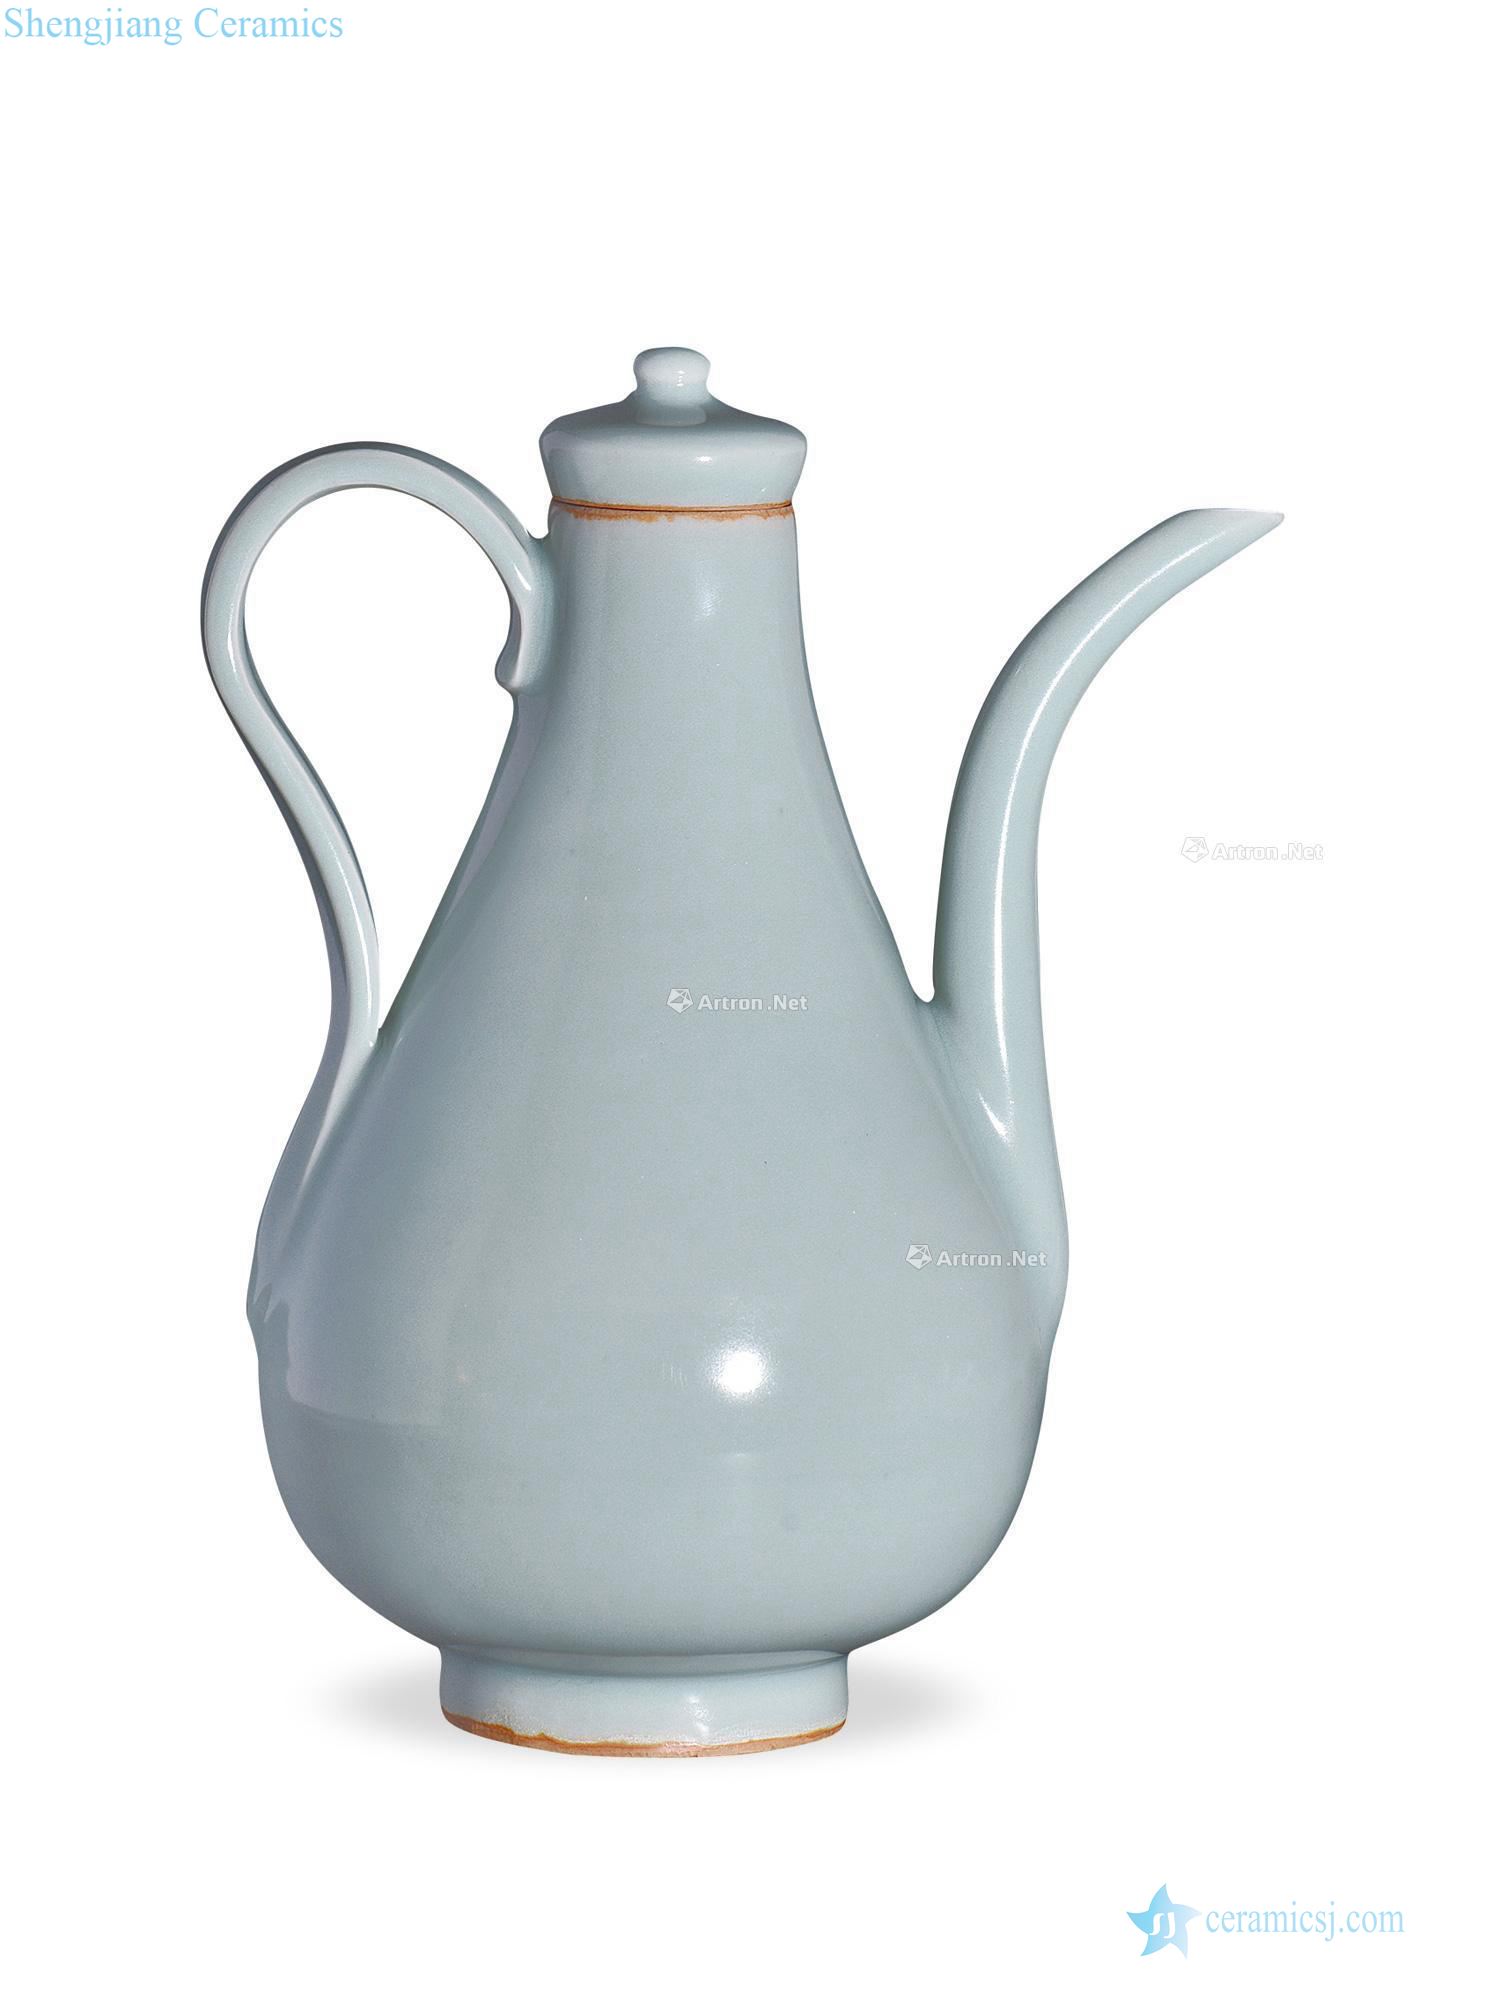 Northern song dynasty Longquan celadon with cover ewer